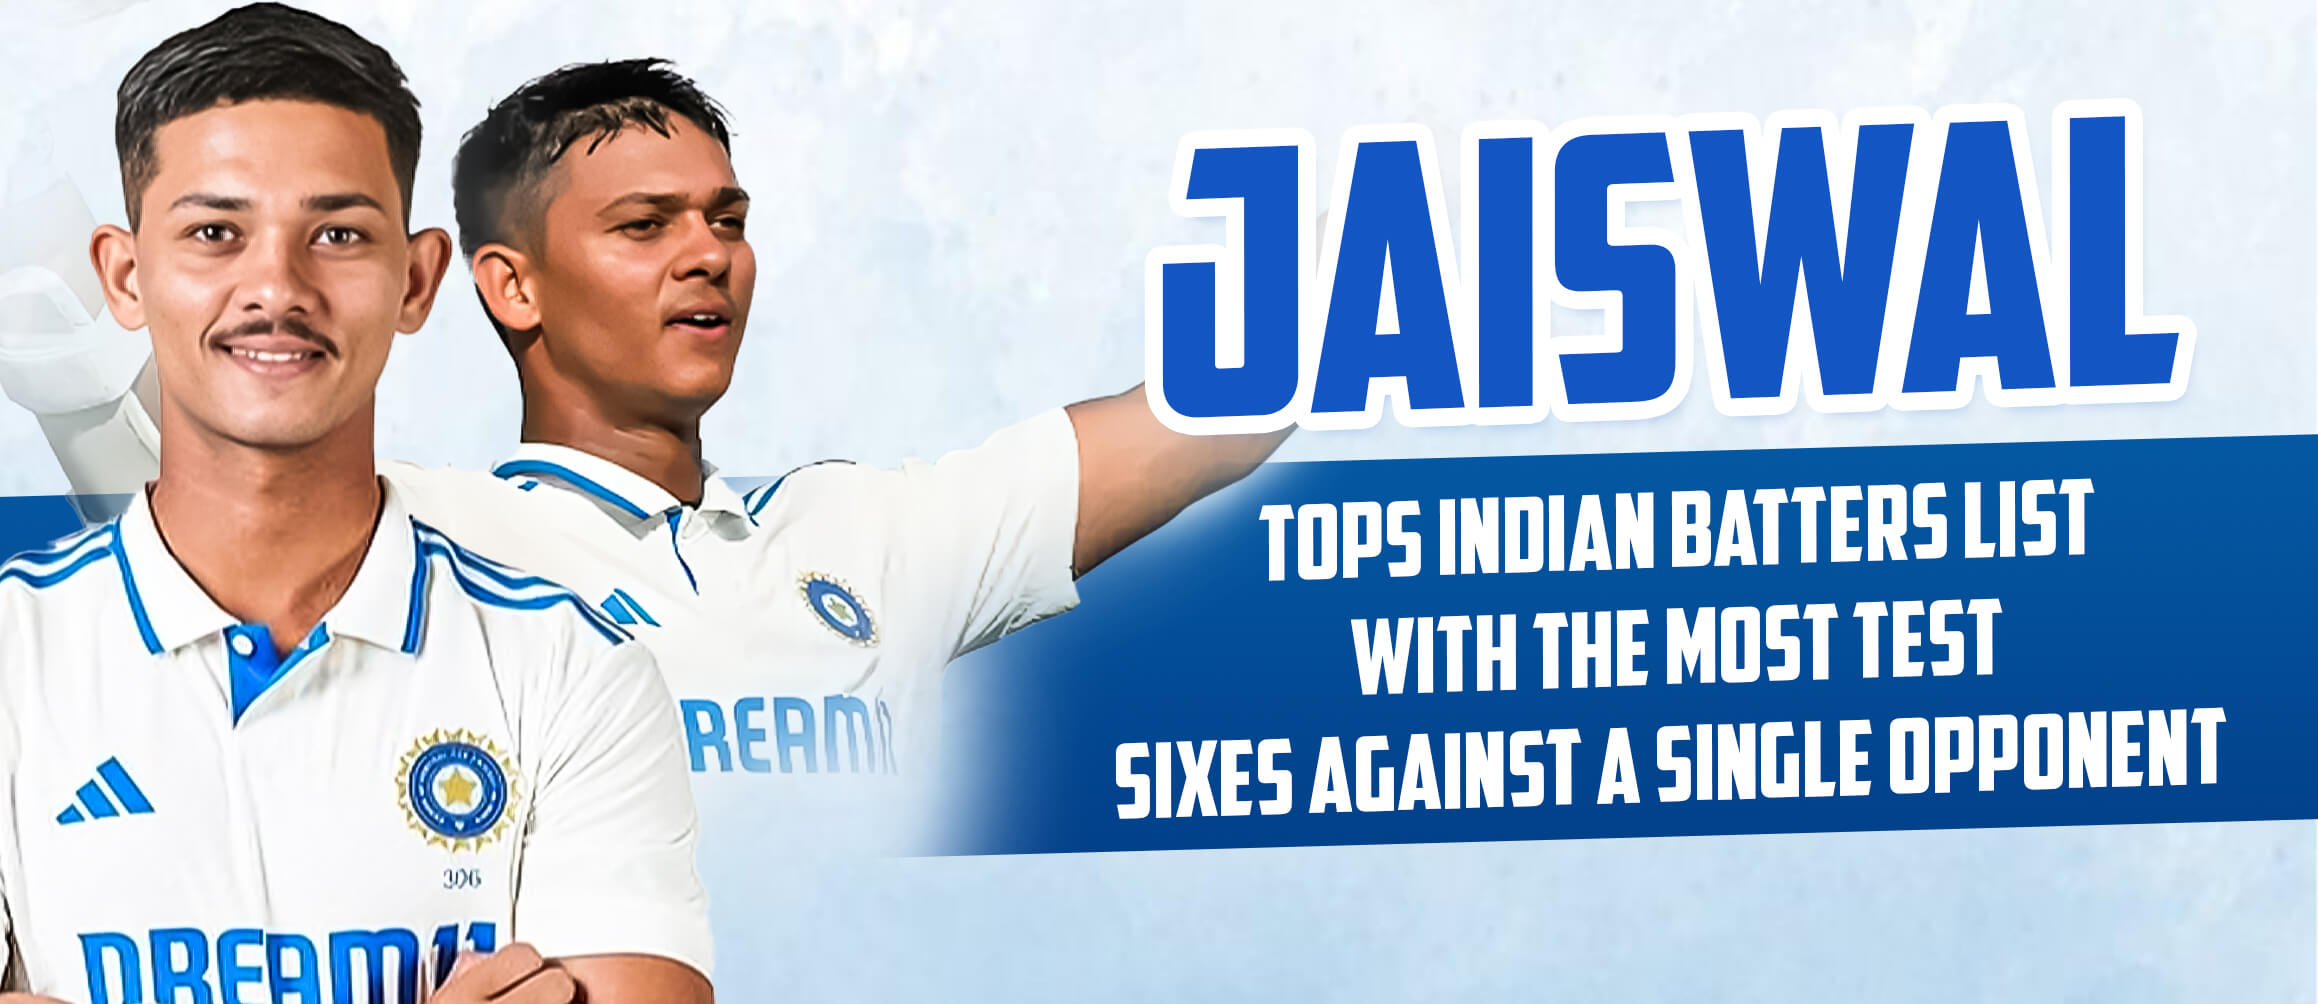 Jaiswal Tops Indian Batters List with the most Test sixes against a single opponent